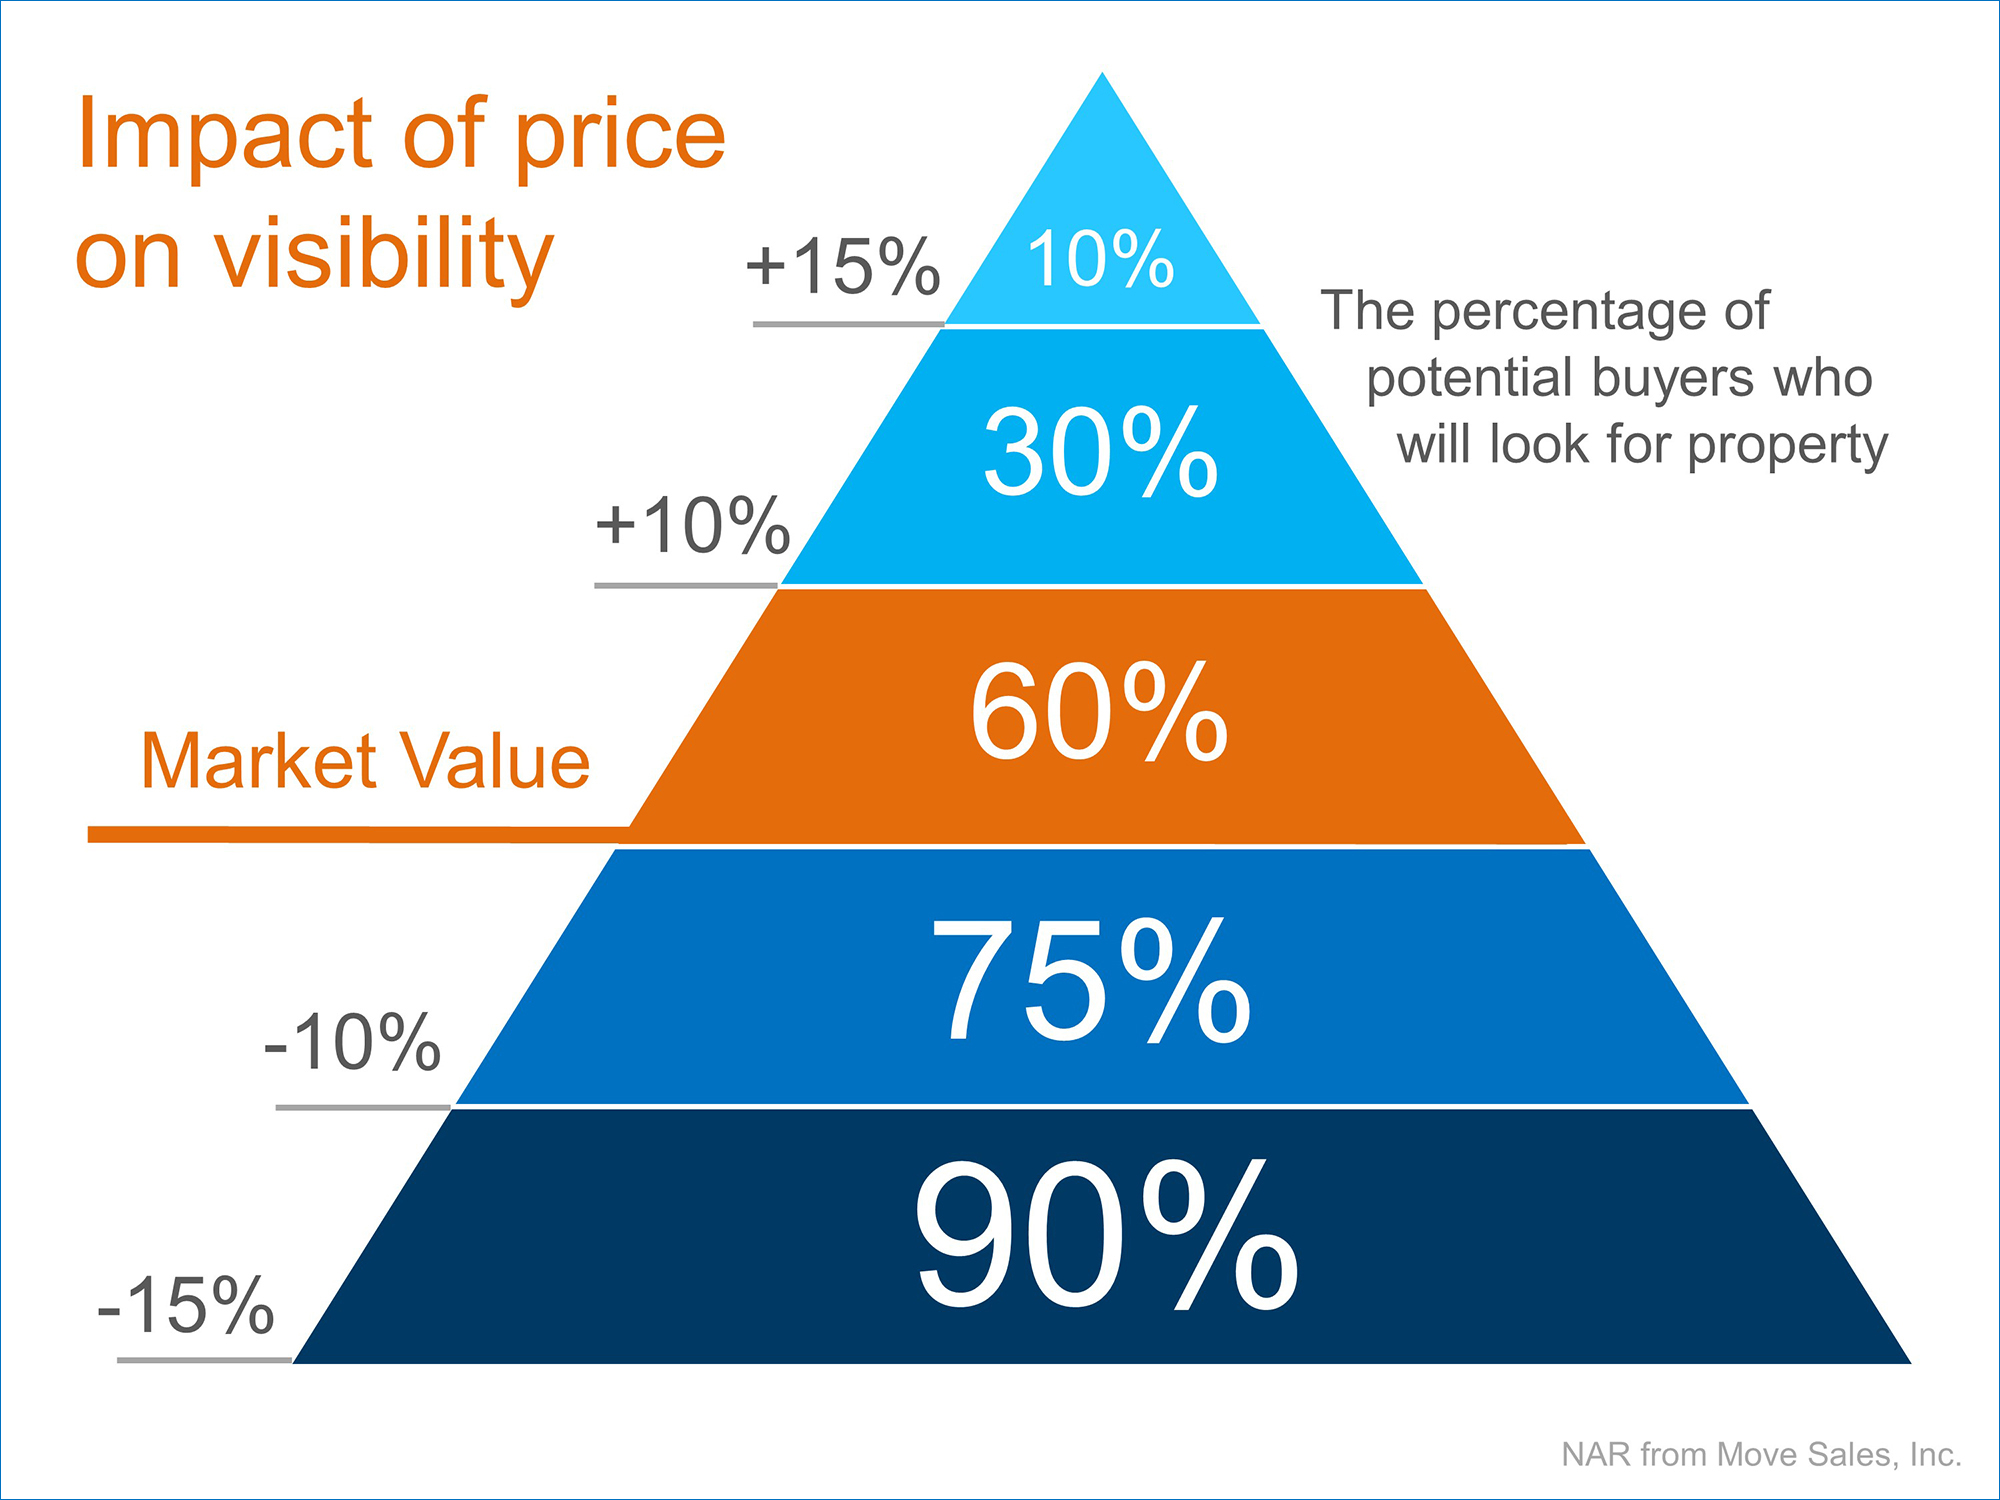 Pricing Strategy Chart